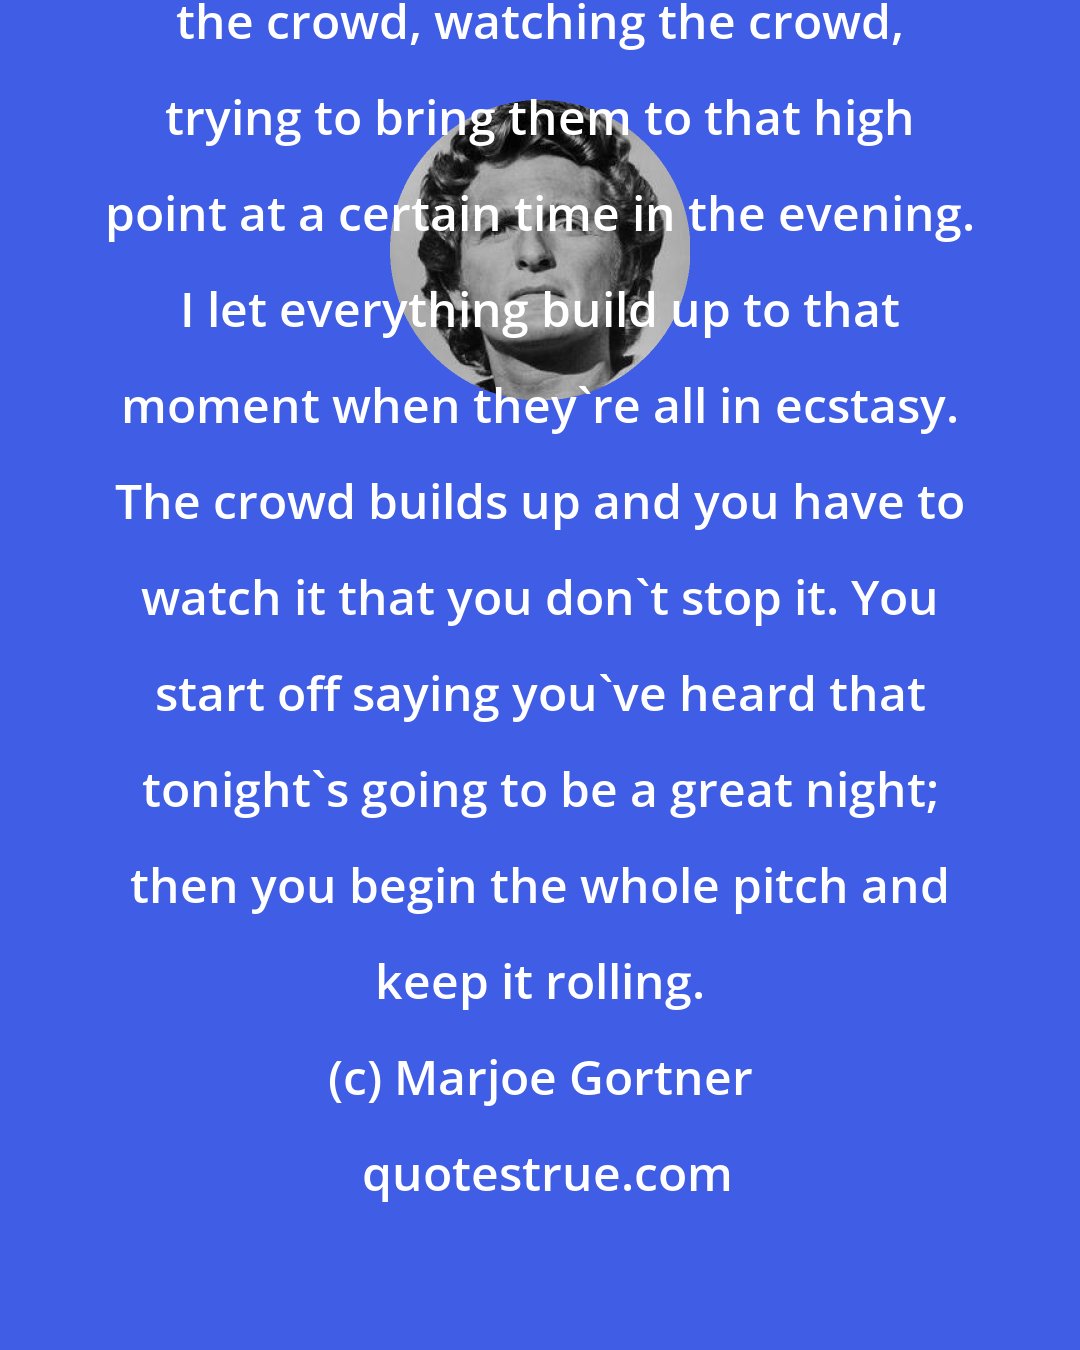 Marjoe Gortner: As a preacher, I'm working with the crowd, watching the crowd, trying to bring them to that high point at a certain time in the evening. I let everything build up to that moment when they're all in ecstasy. The crowd builds up and you have to watch it that you don't stop it. You start off saying you've heard that tonight's going to be a great night; then you begin the whole pitch and keep it rolling.